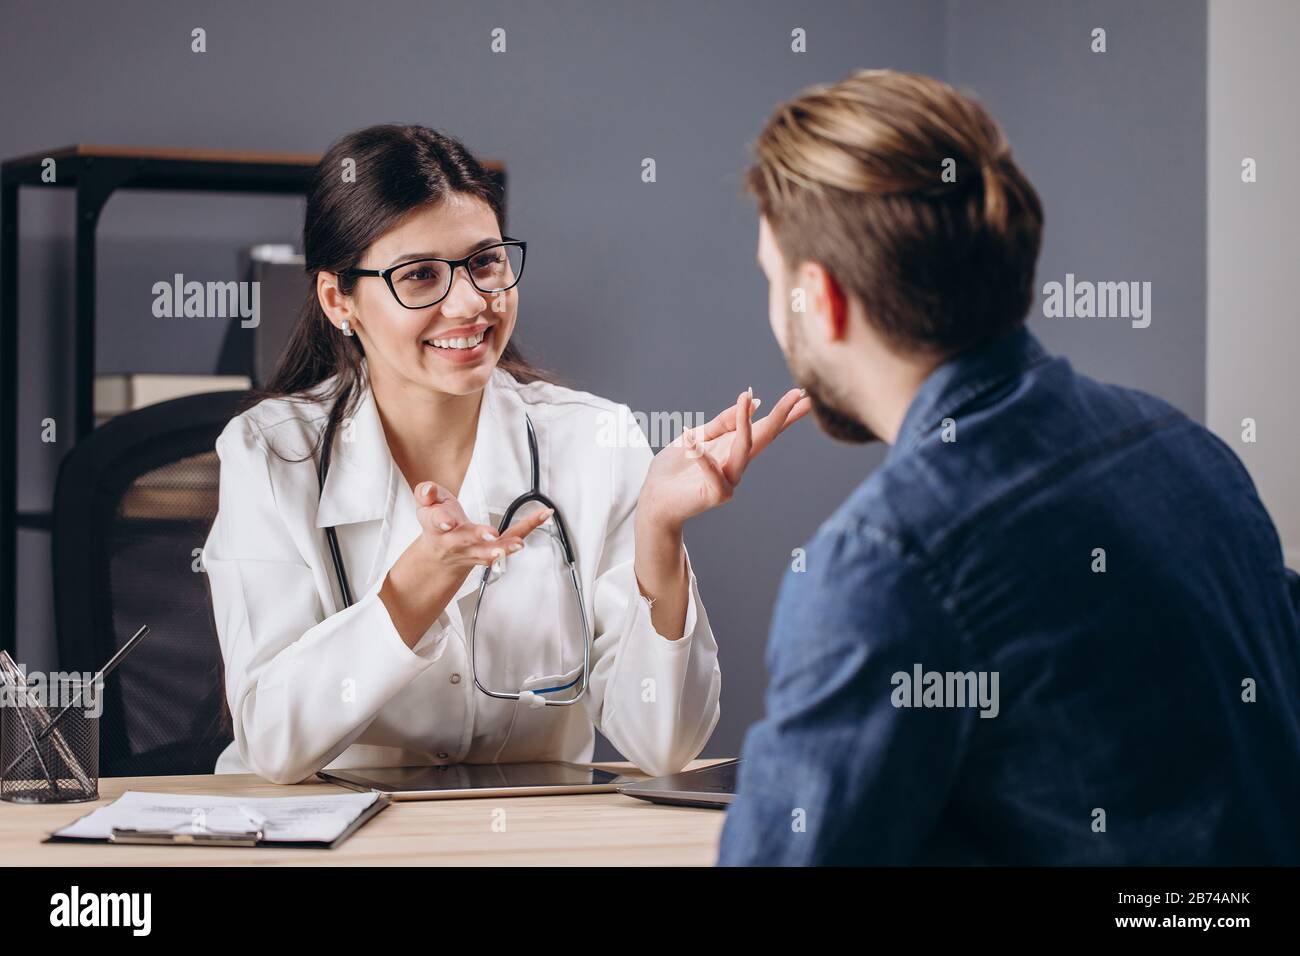 MD Having a Delightful Conversation With Healed Patient Stock Photo